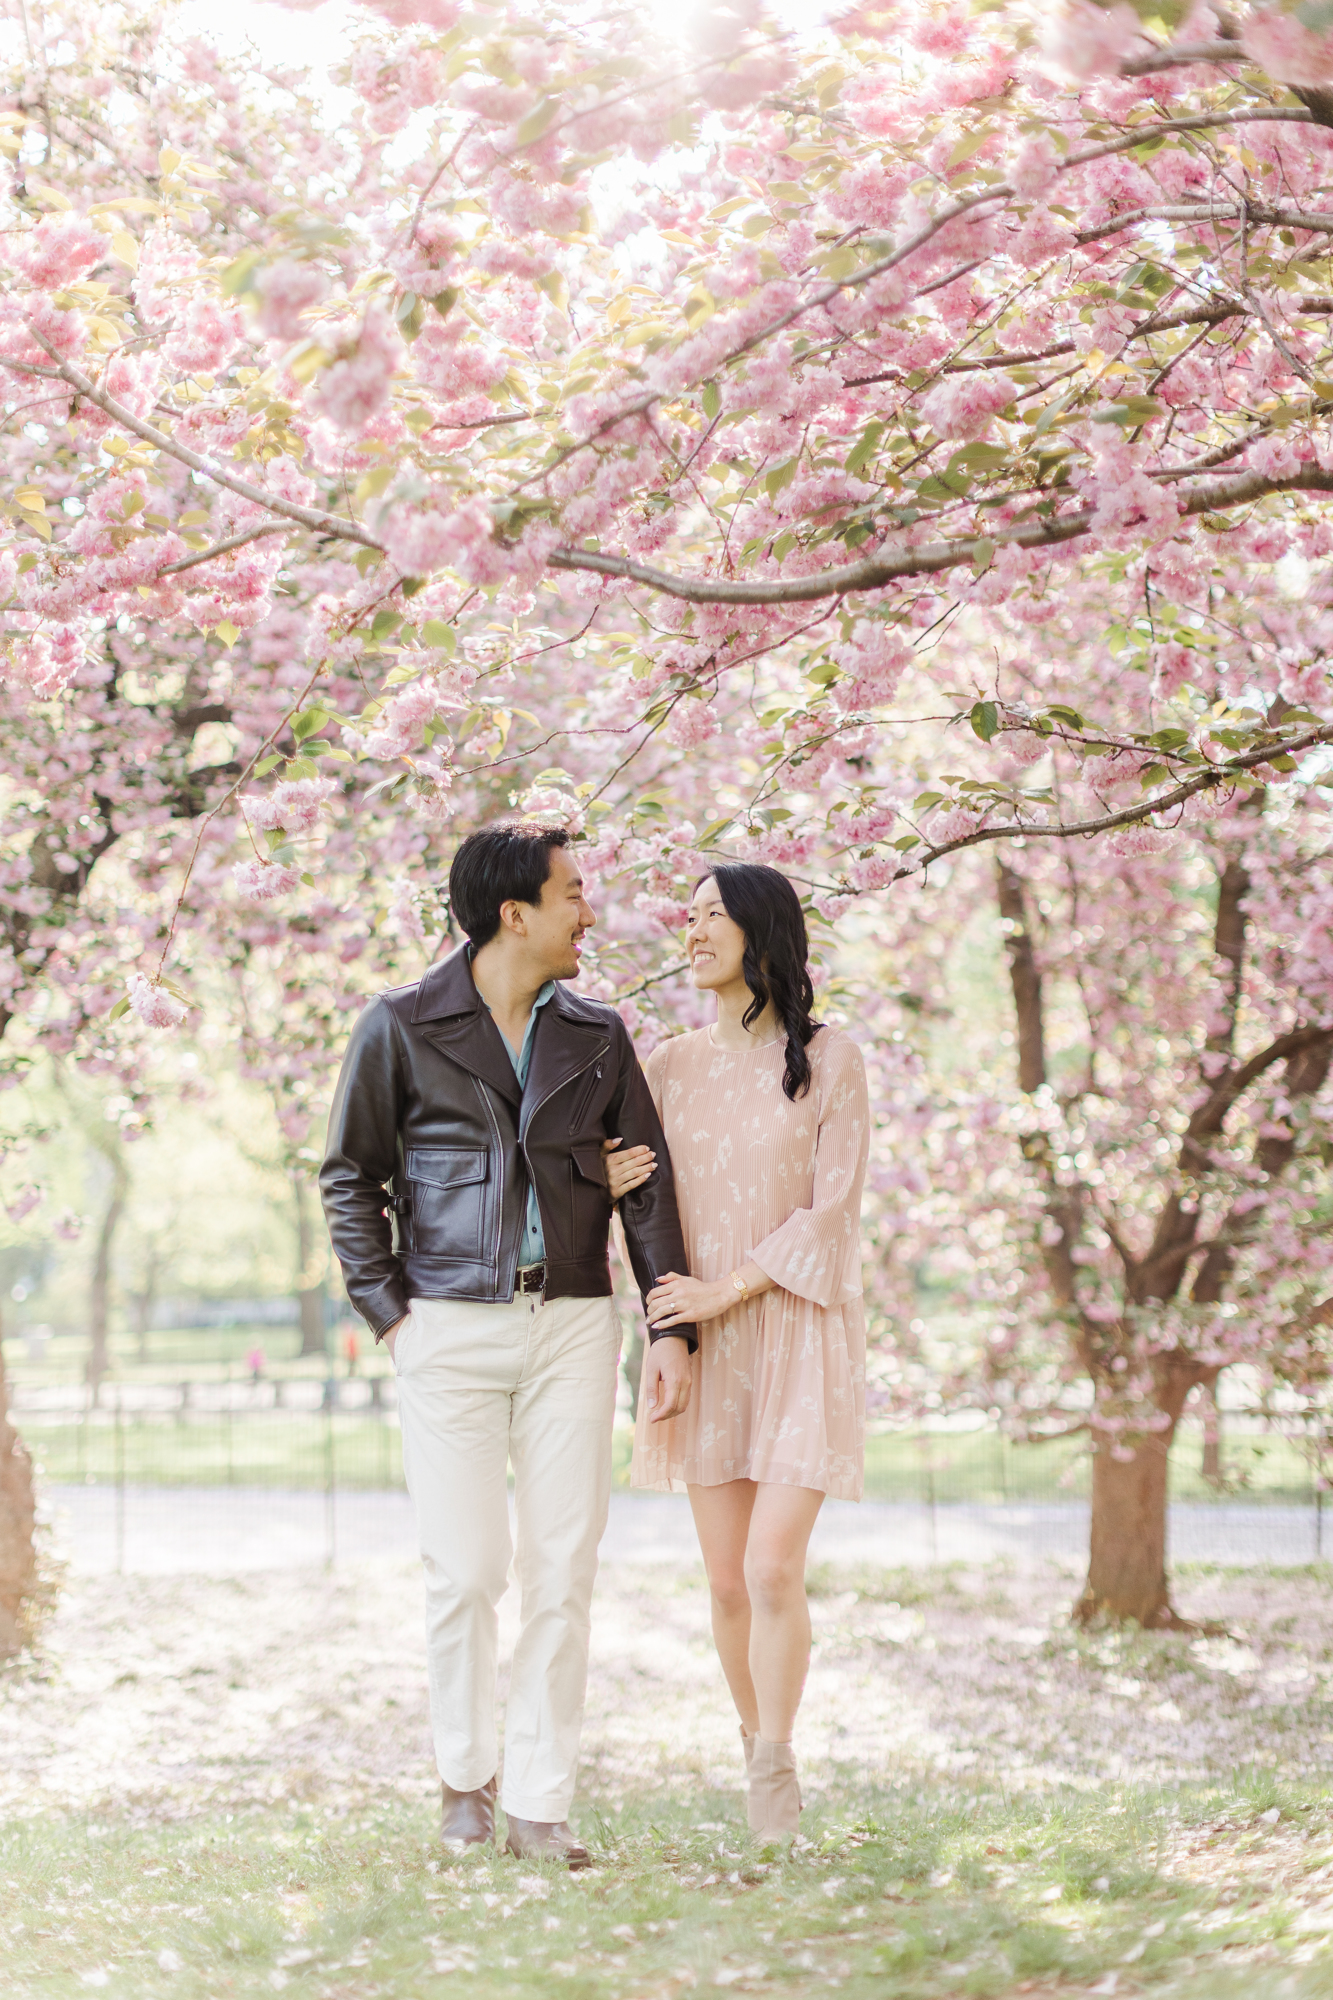 Cheerful Engagement Photos With Cherry Blossoms in NYC